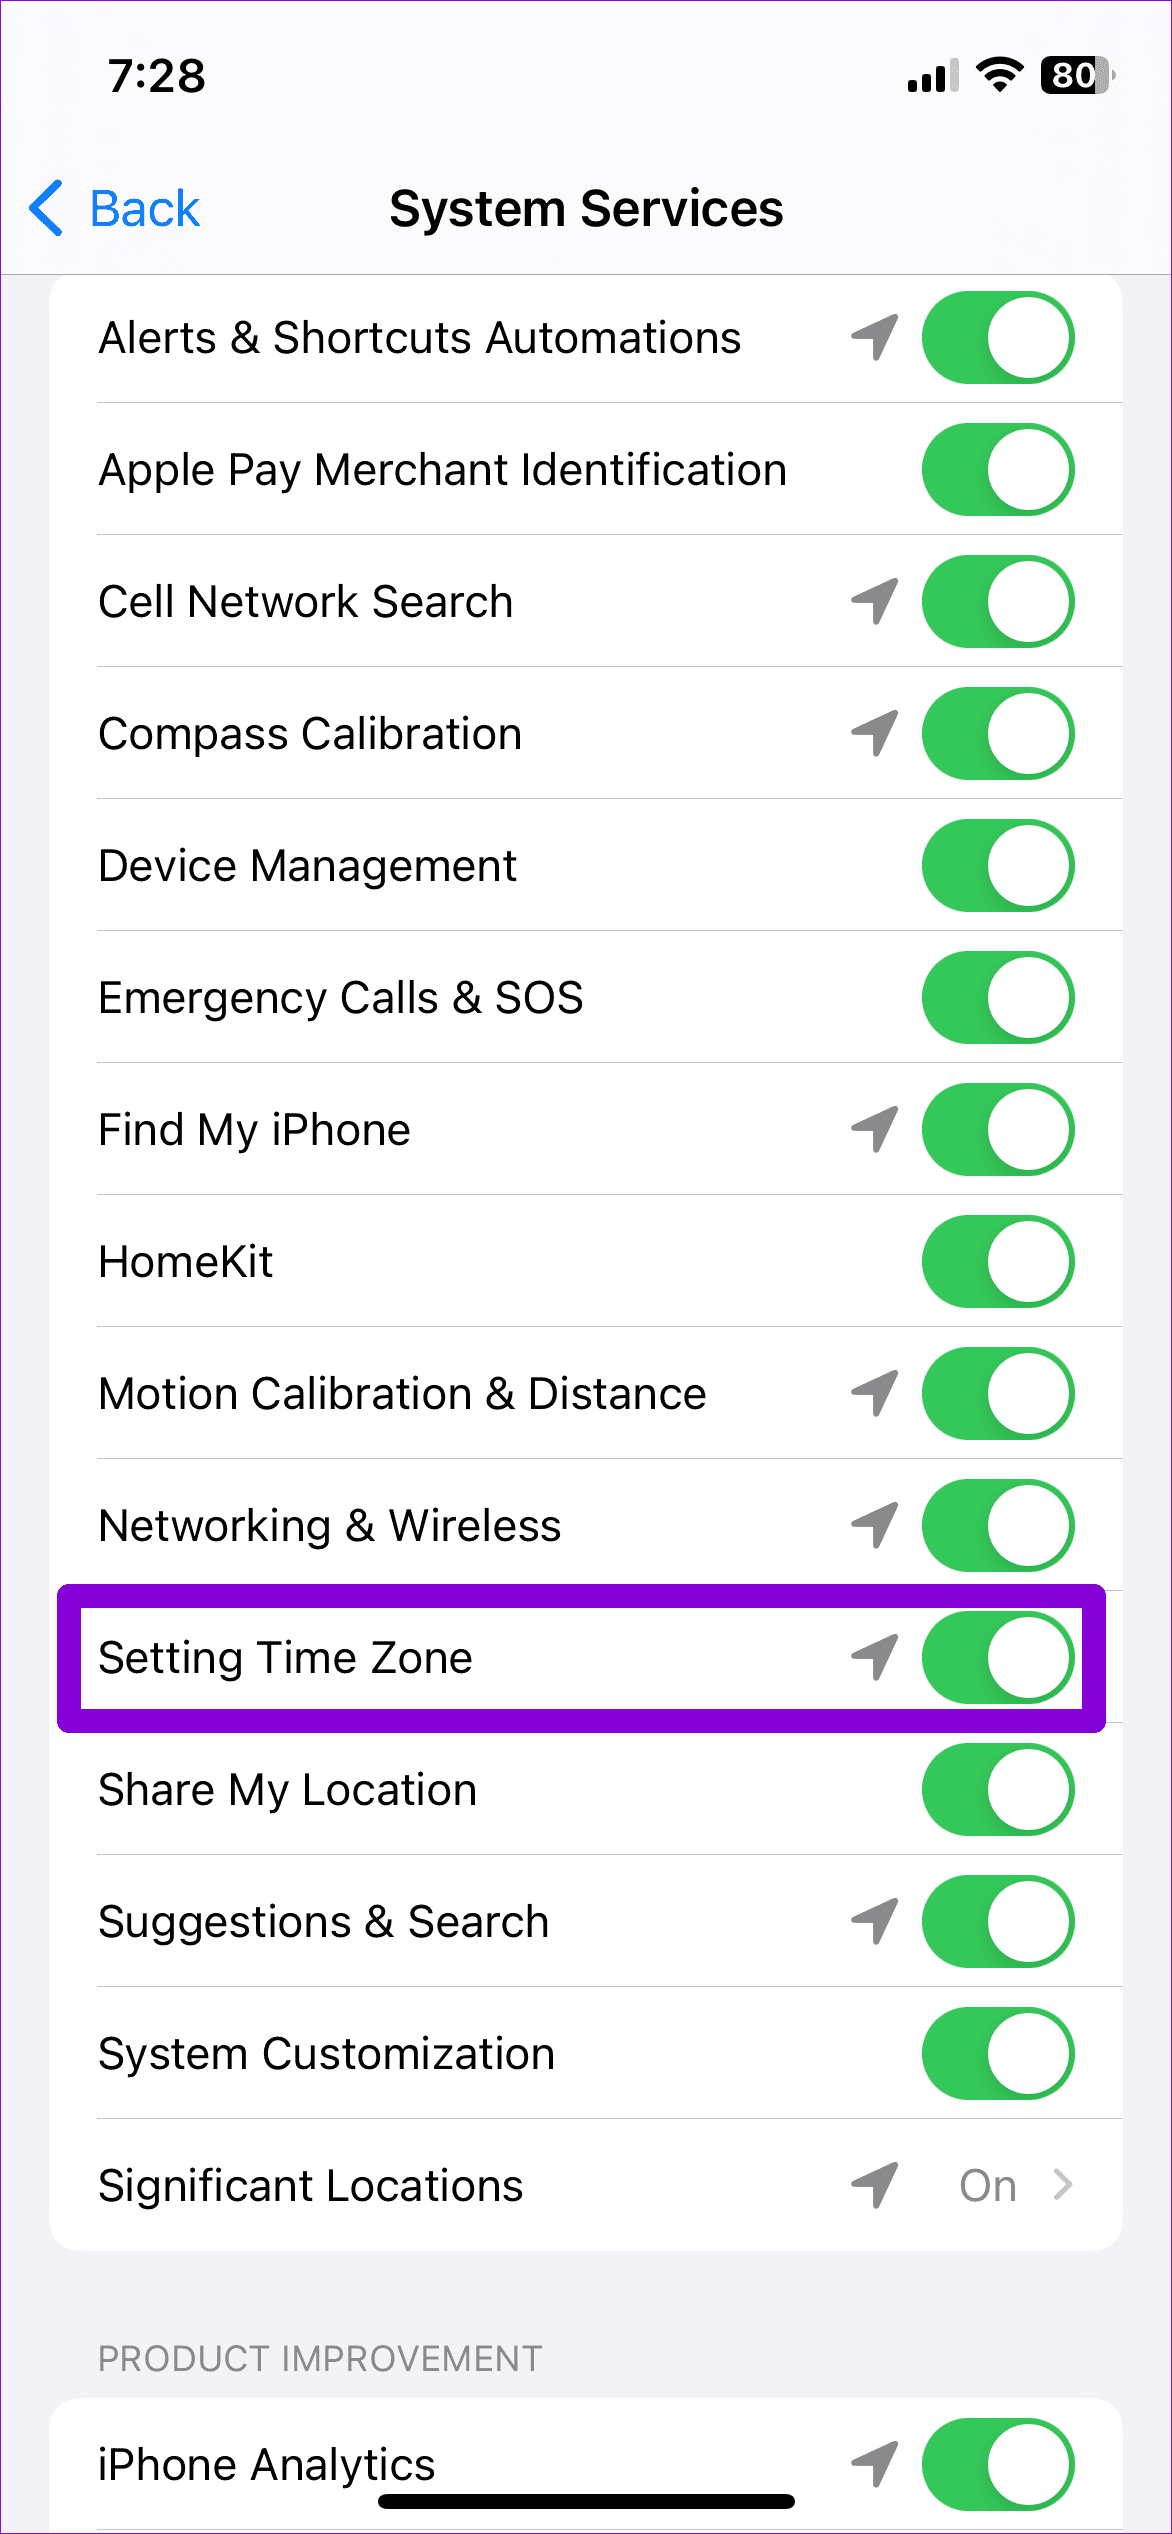 Enable Time Zone Service on iPhone